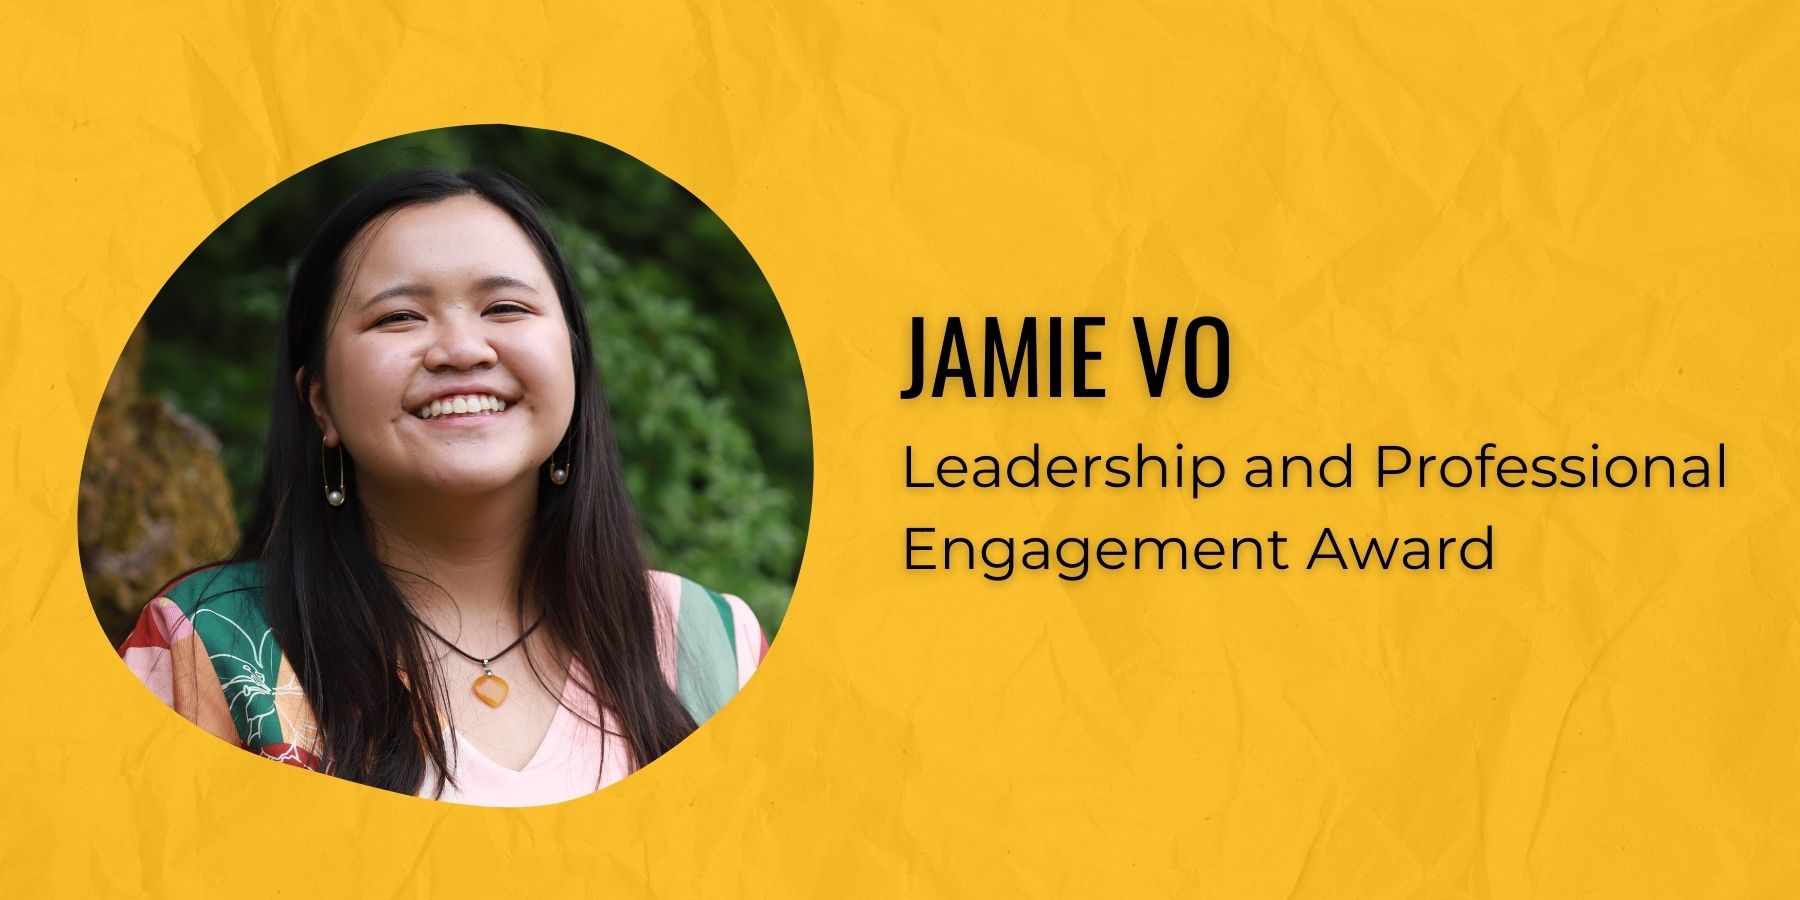 Photo of  Jamie Vo and text Leadership and Engagement Award